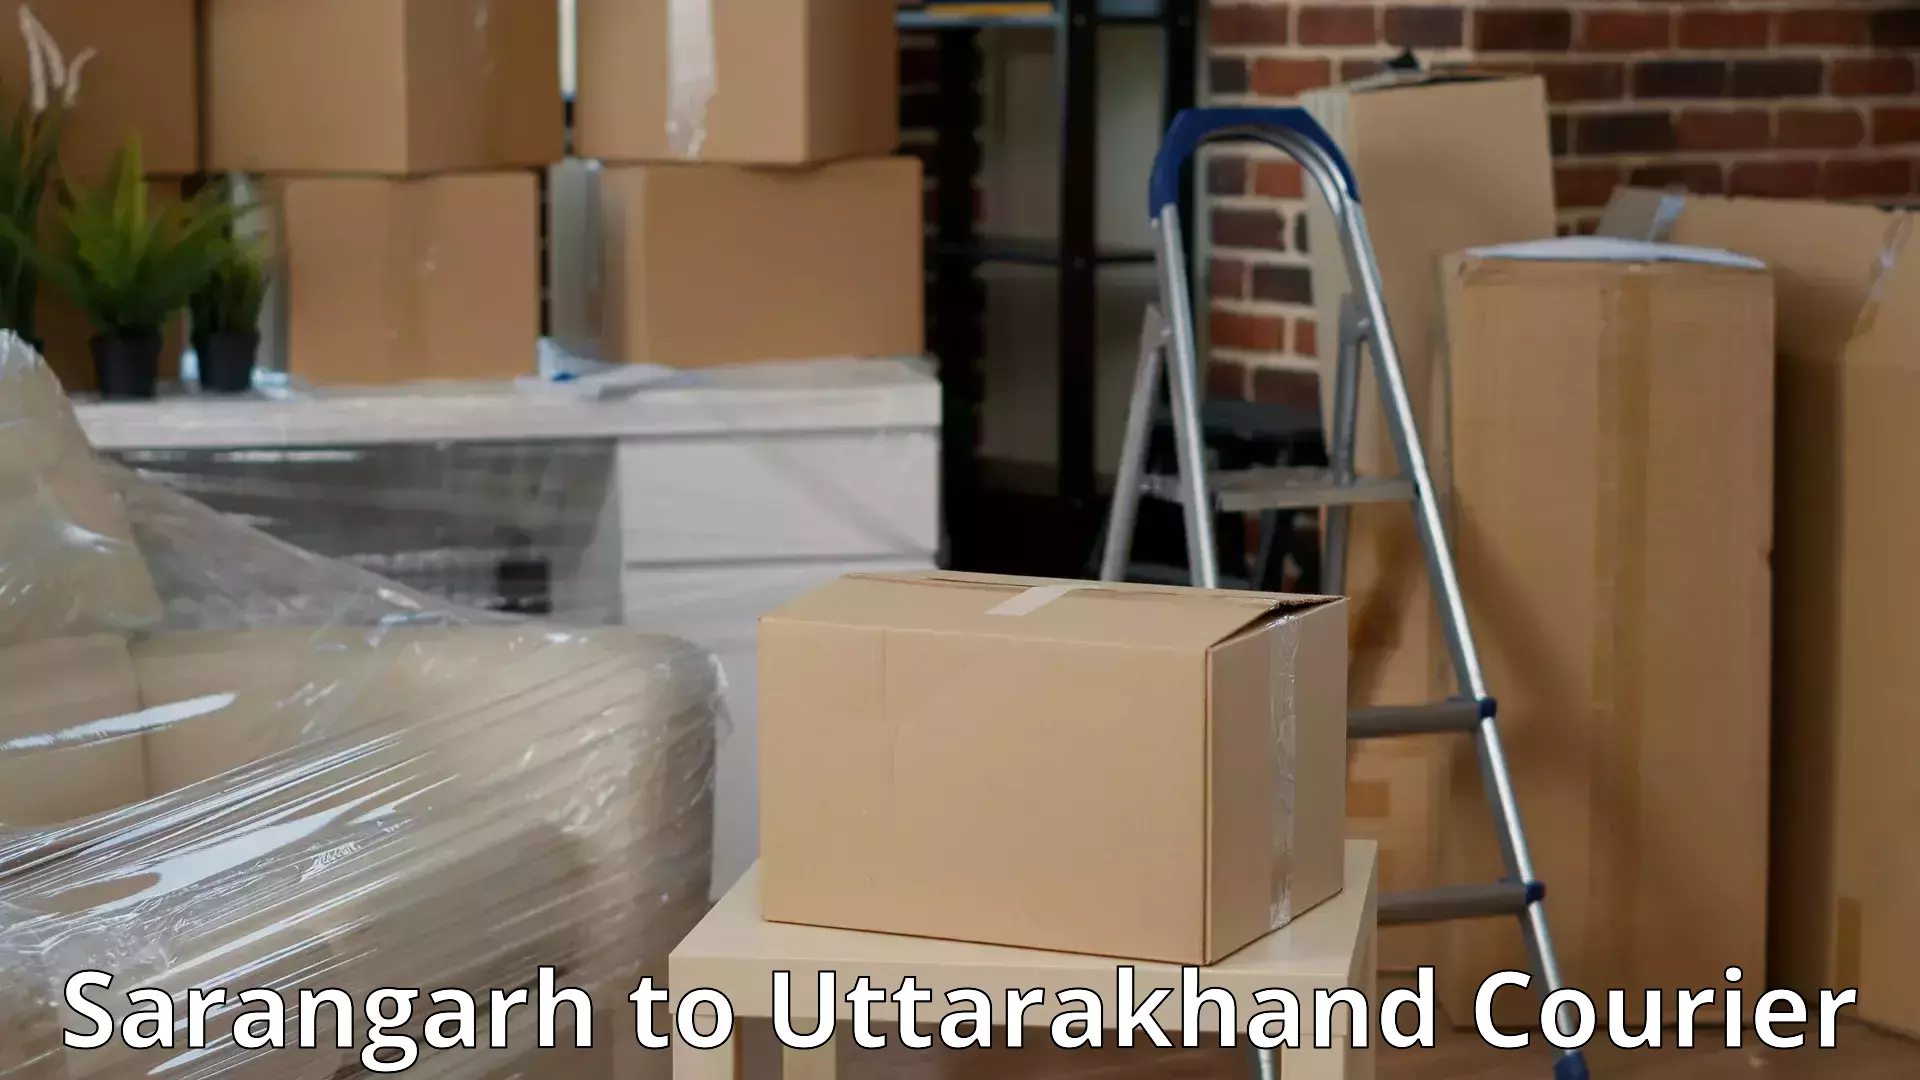 Home relocation services in Sarangarh to Ranikhet